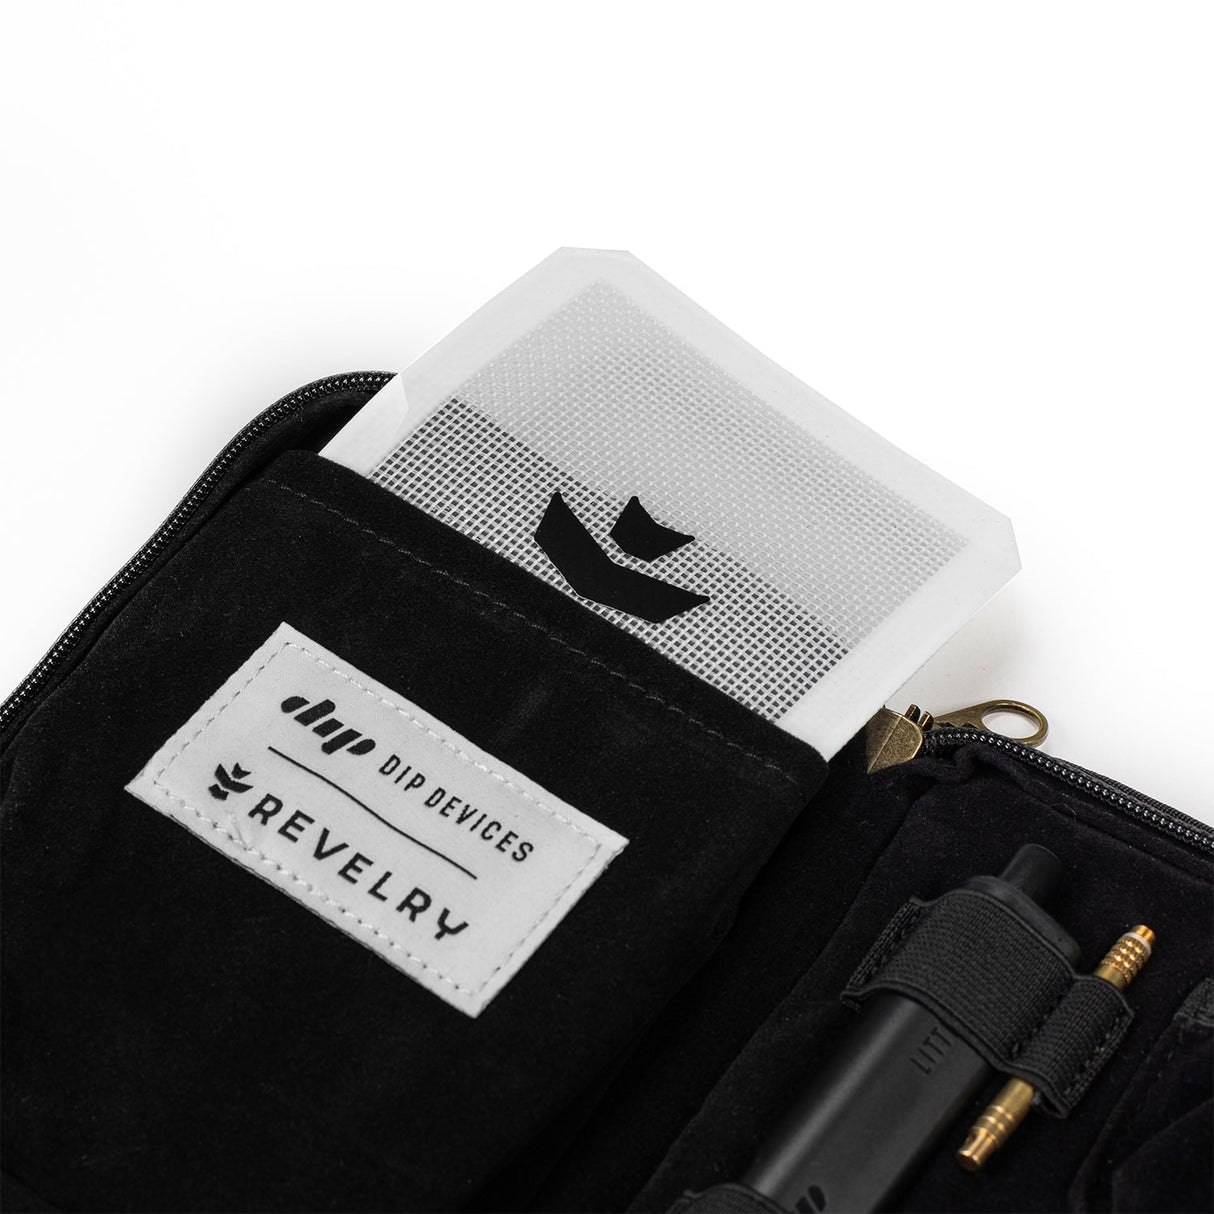 Revelry Supply's The Dab Kit open view displaying smell proof compartments and tools